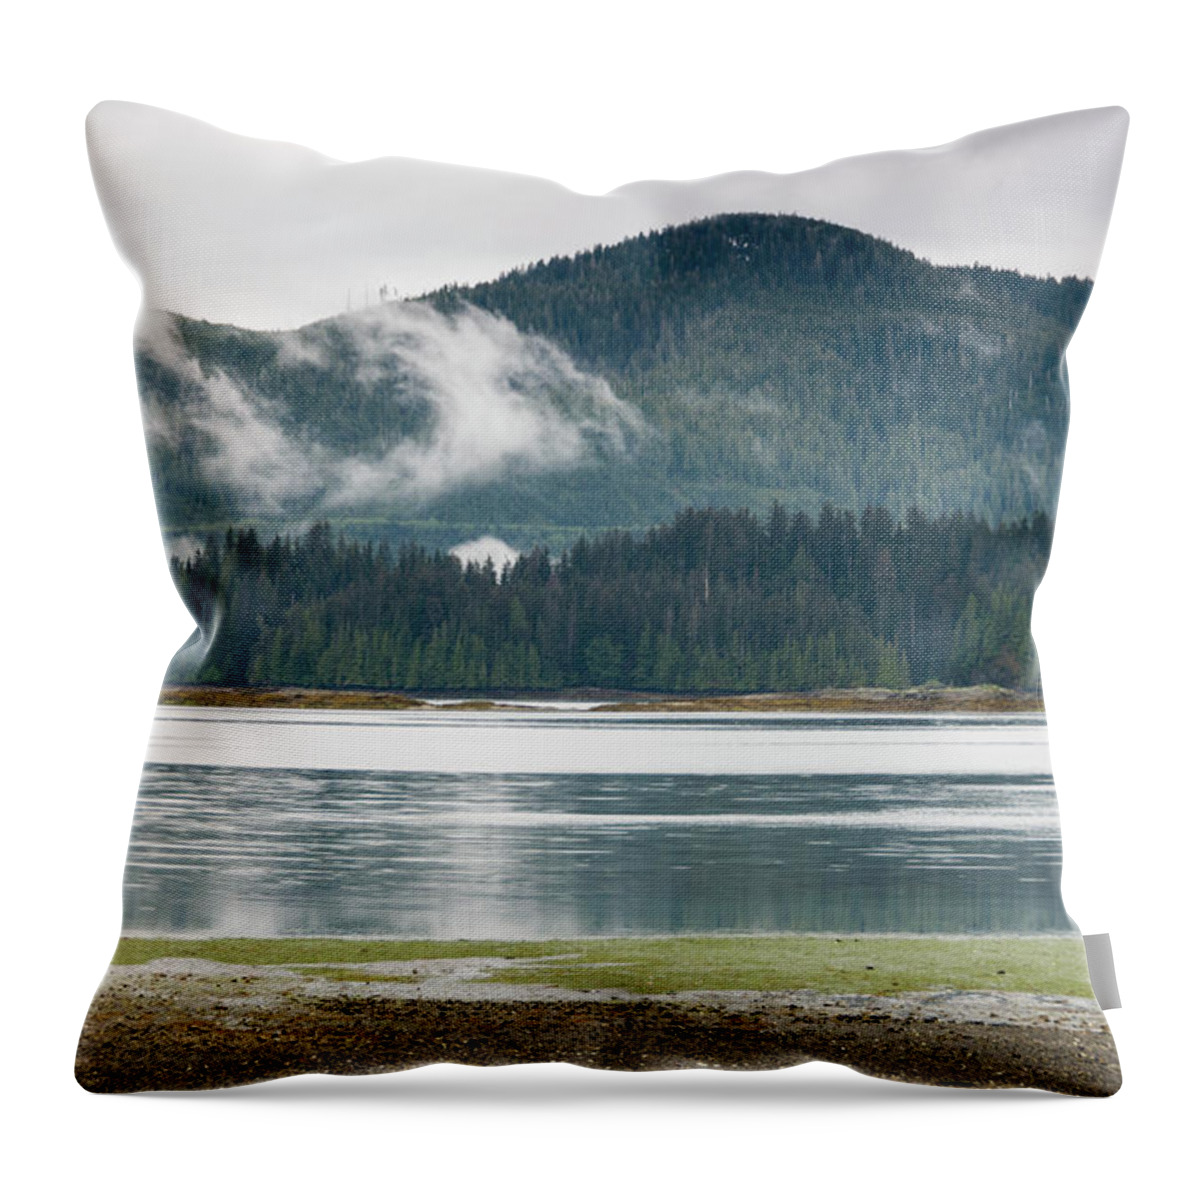 Scenics Throw Pillow featuring the photograph Kagan Bay, Hecate Strait by John Elk Iii